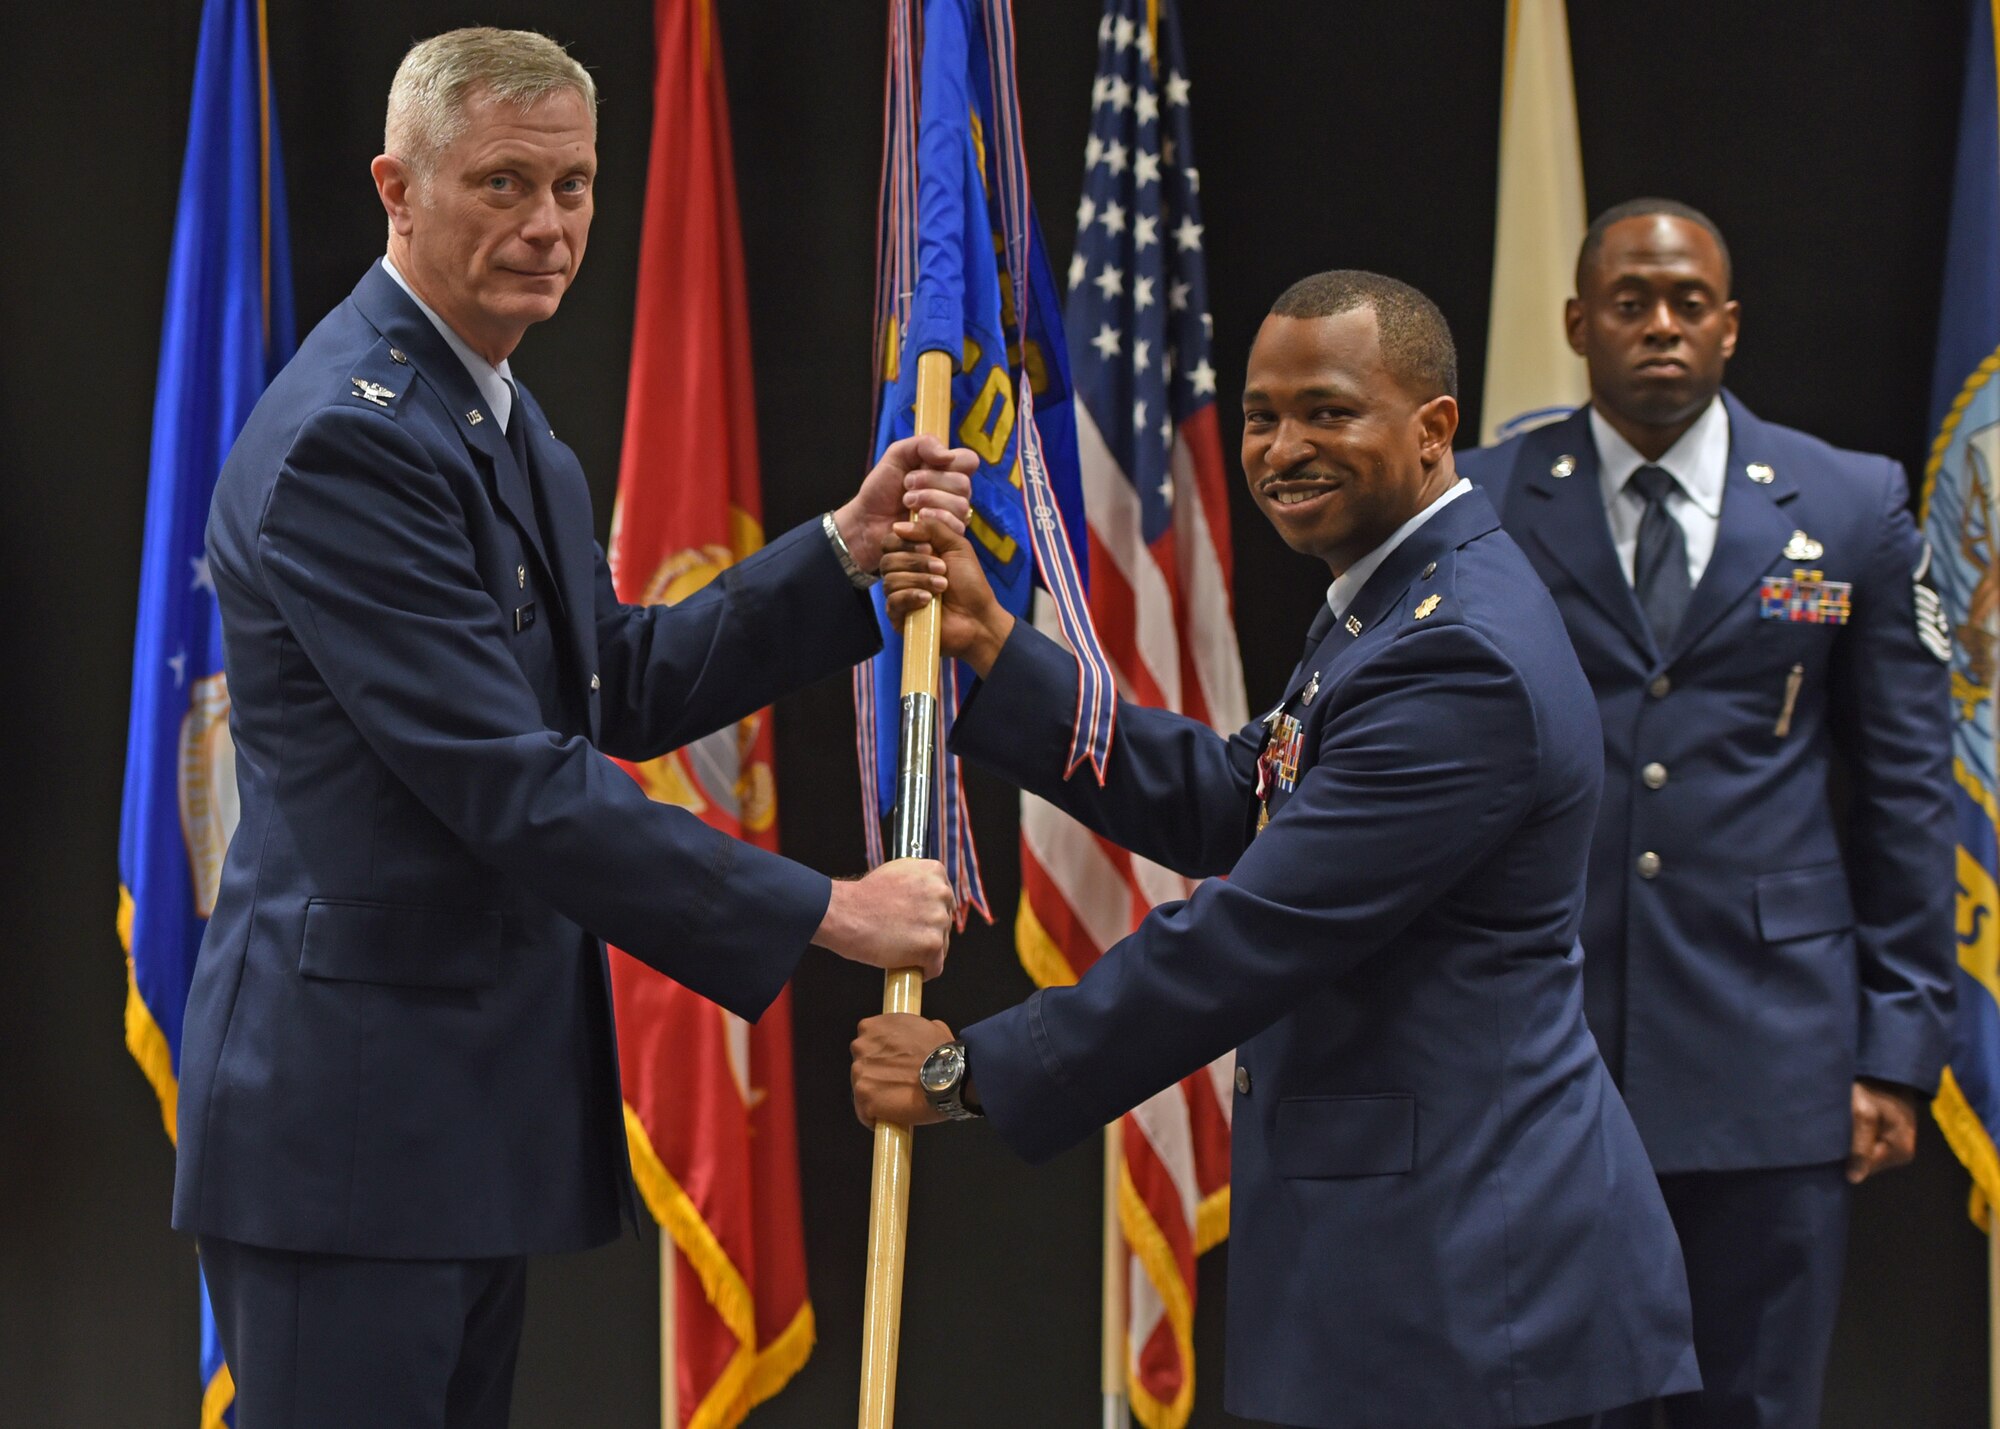 U.S. Air Force Col. Tony England, 17th Mission Support Group commander, takes the guidon from Maj. Michael Quinn, 17th Contracting Squadron outgoing commander, during the 17th CONS change of command ceremony at the Event Center, June 21, 2021. Quinn was in command of the 17th CONS for three years. (U.S. Air Force photo by Senior Airman Abbey Rieves)